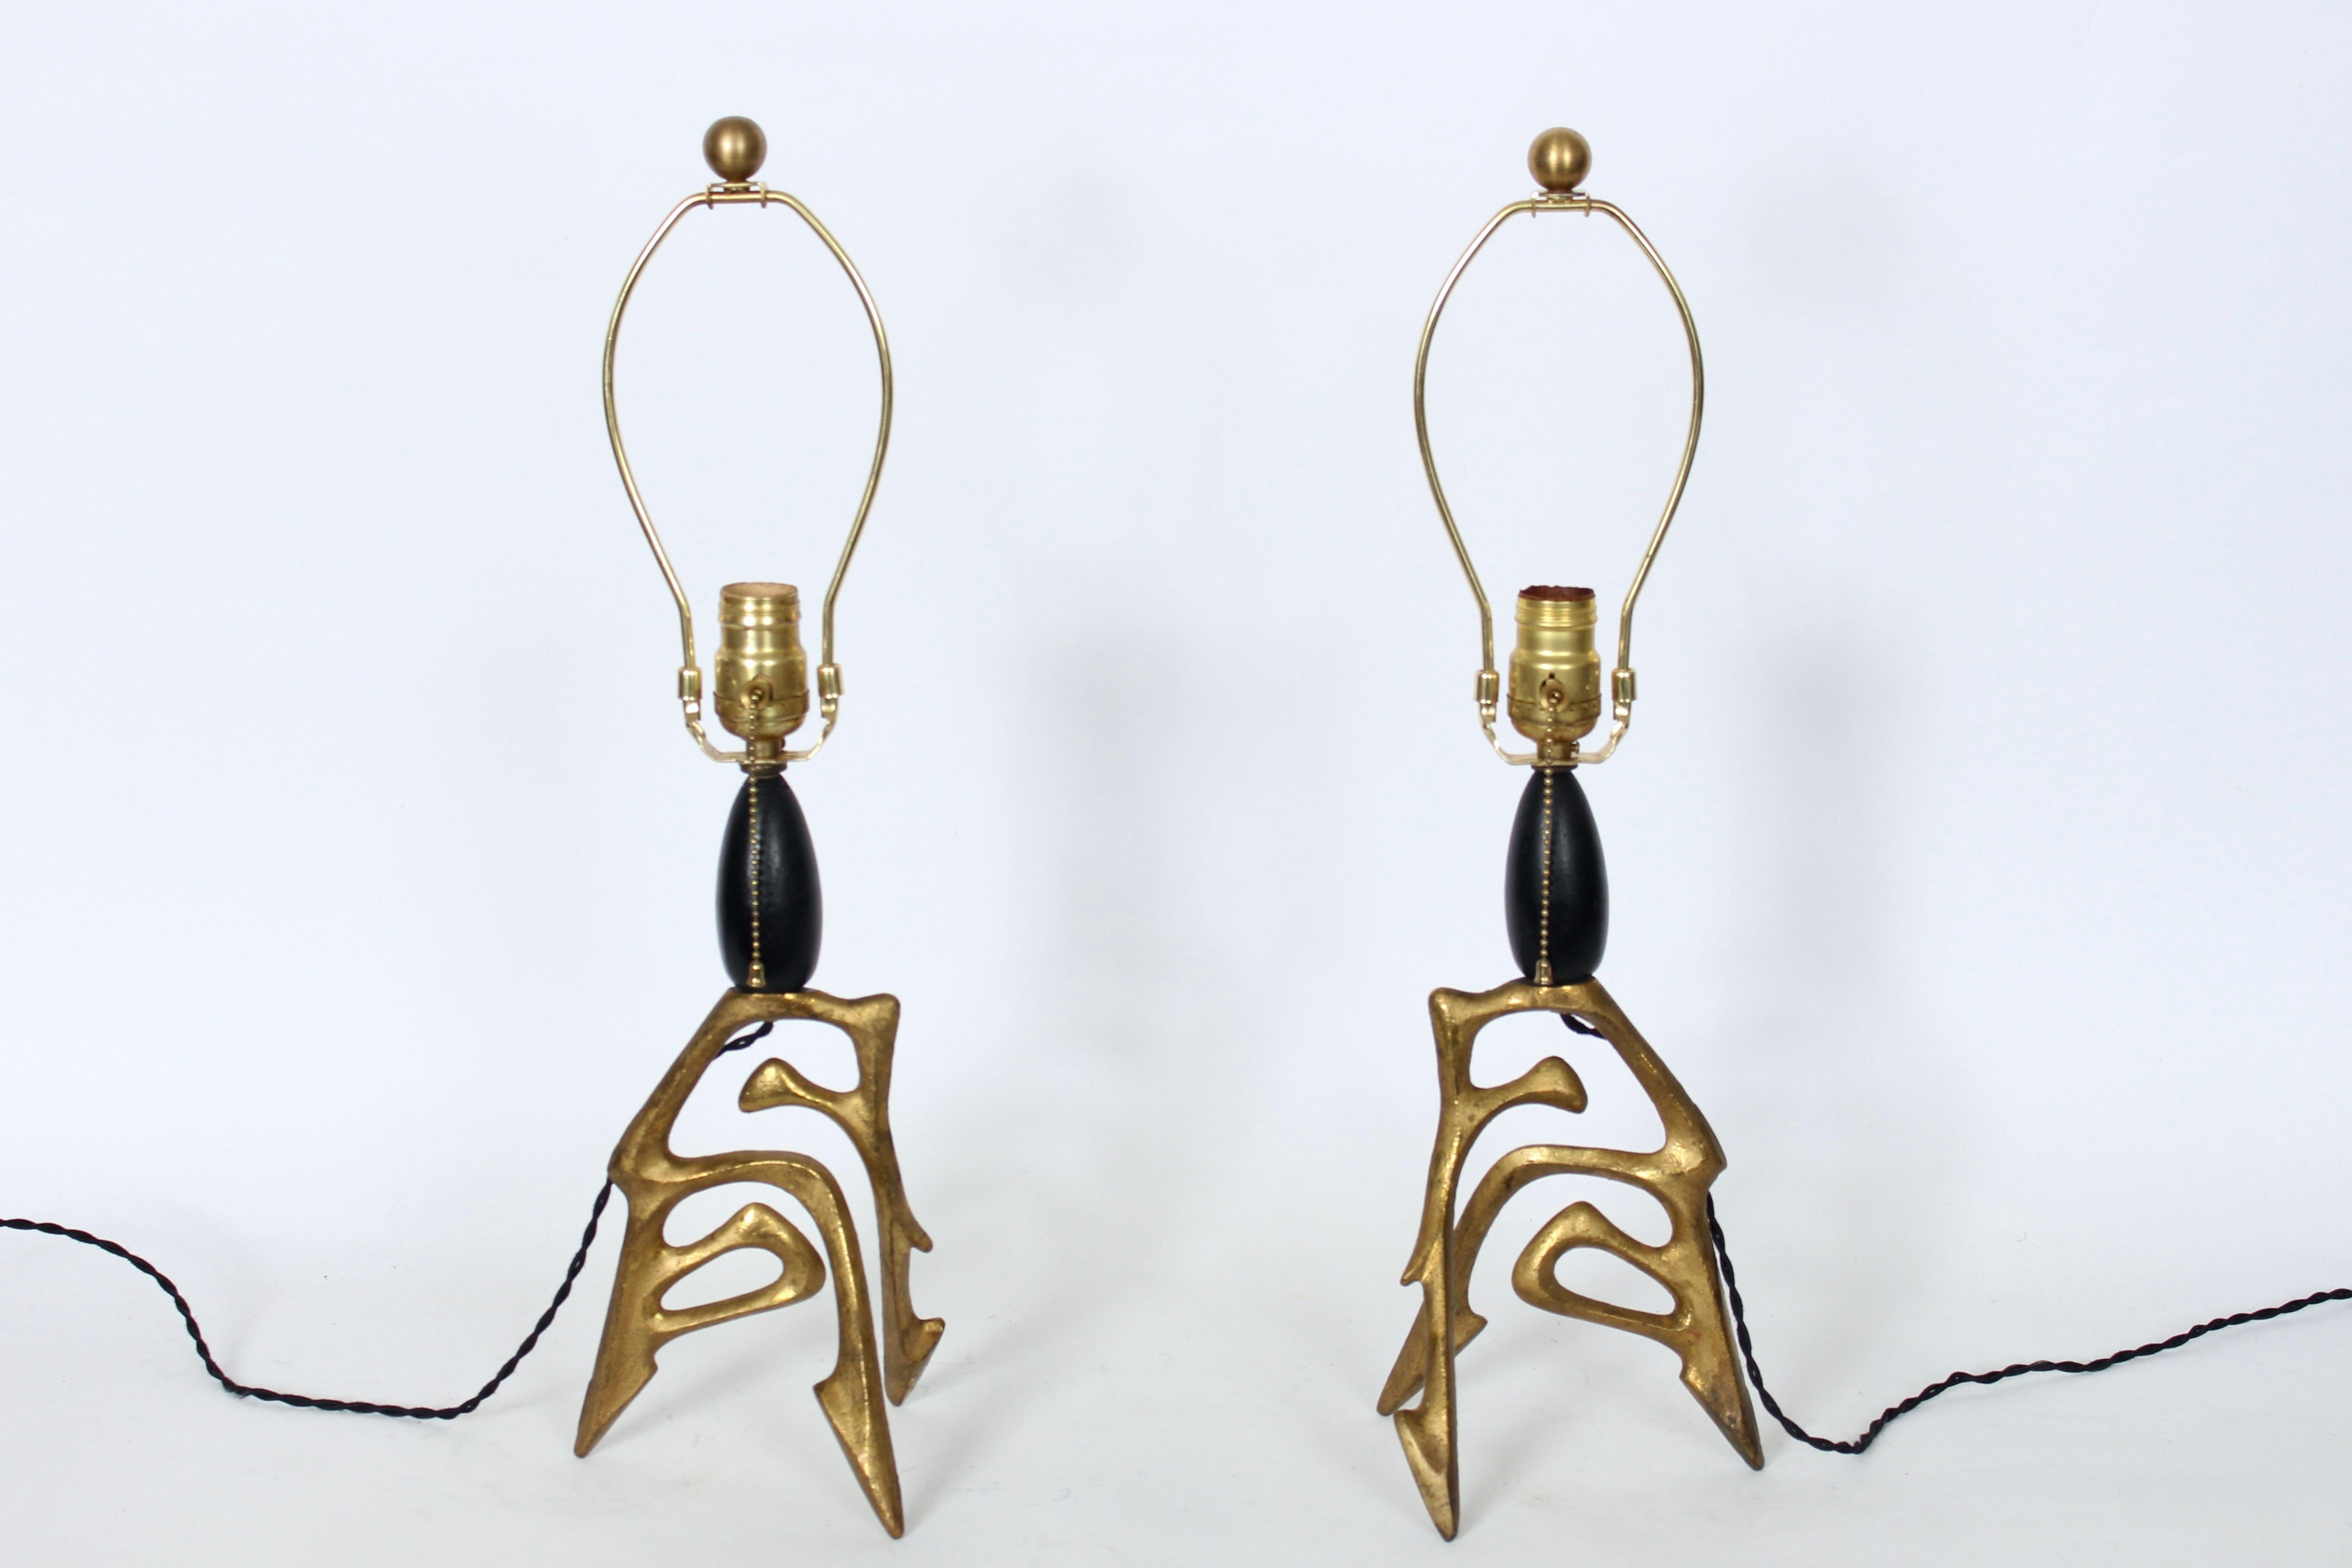 Pair of Frederic Weinberg Abstract Figurative Bronze Table Lamps, C. 1950  In Good Condition For Sale In Bainbridge, NY